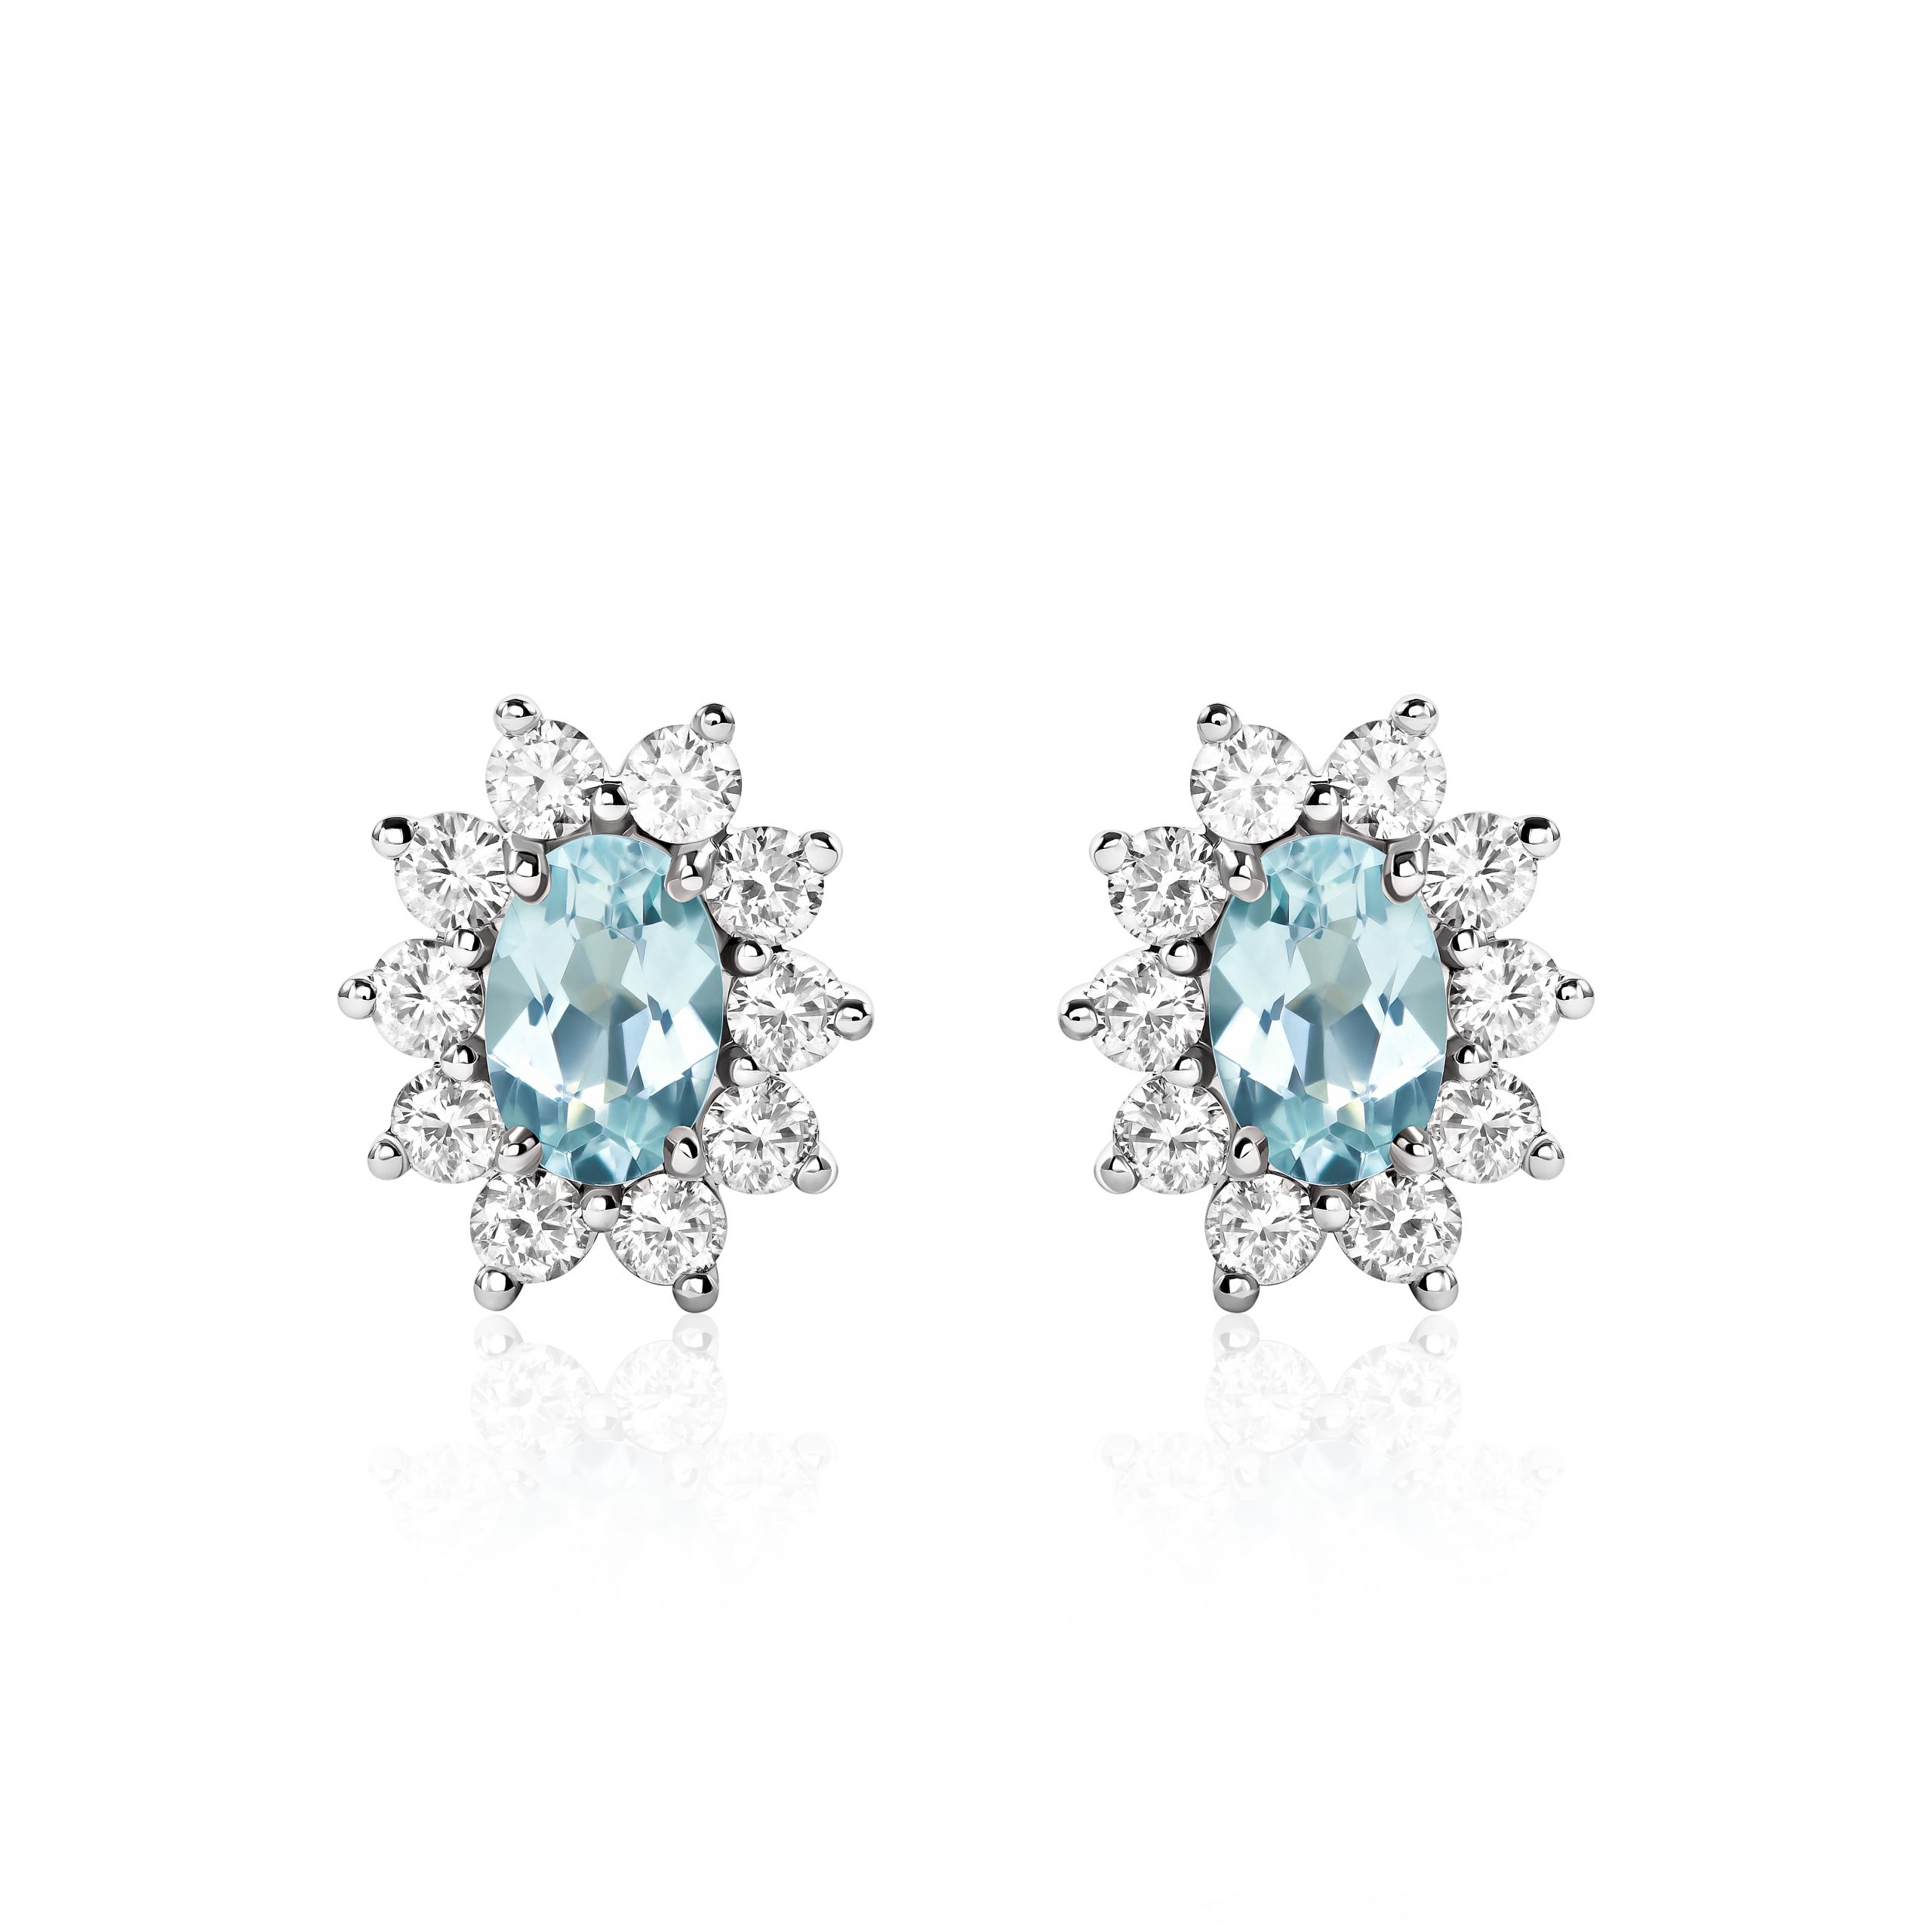 Paraiba tourmaline stud earrings with a total weight of 2.47 ct #1